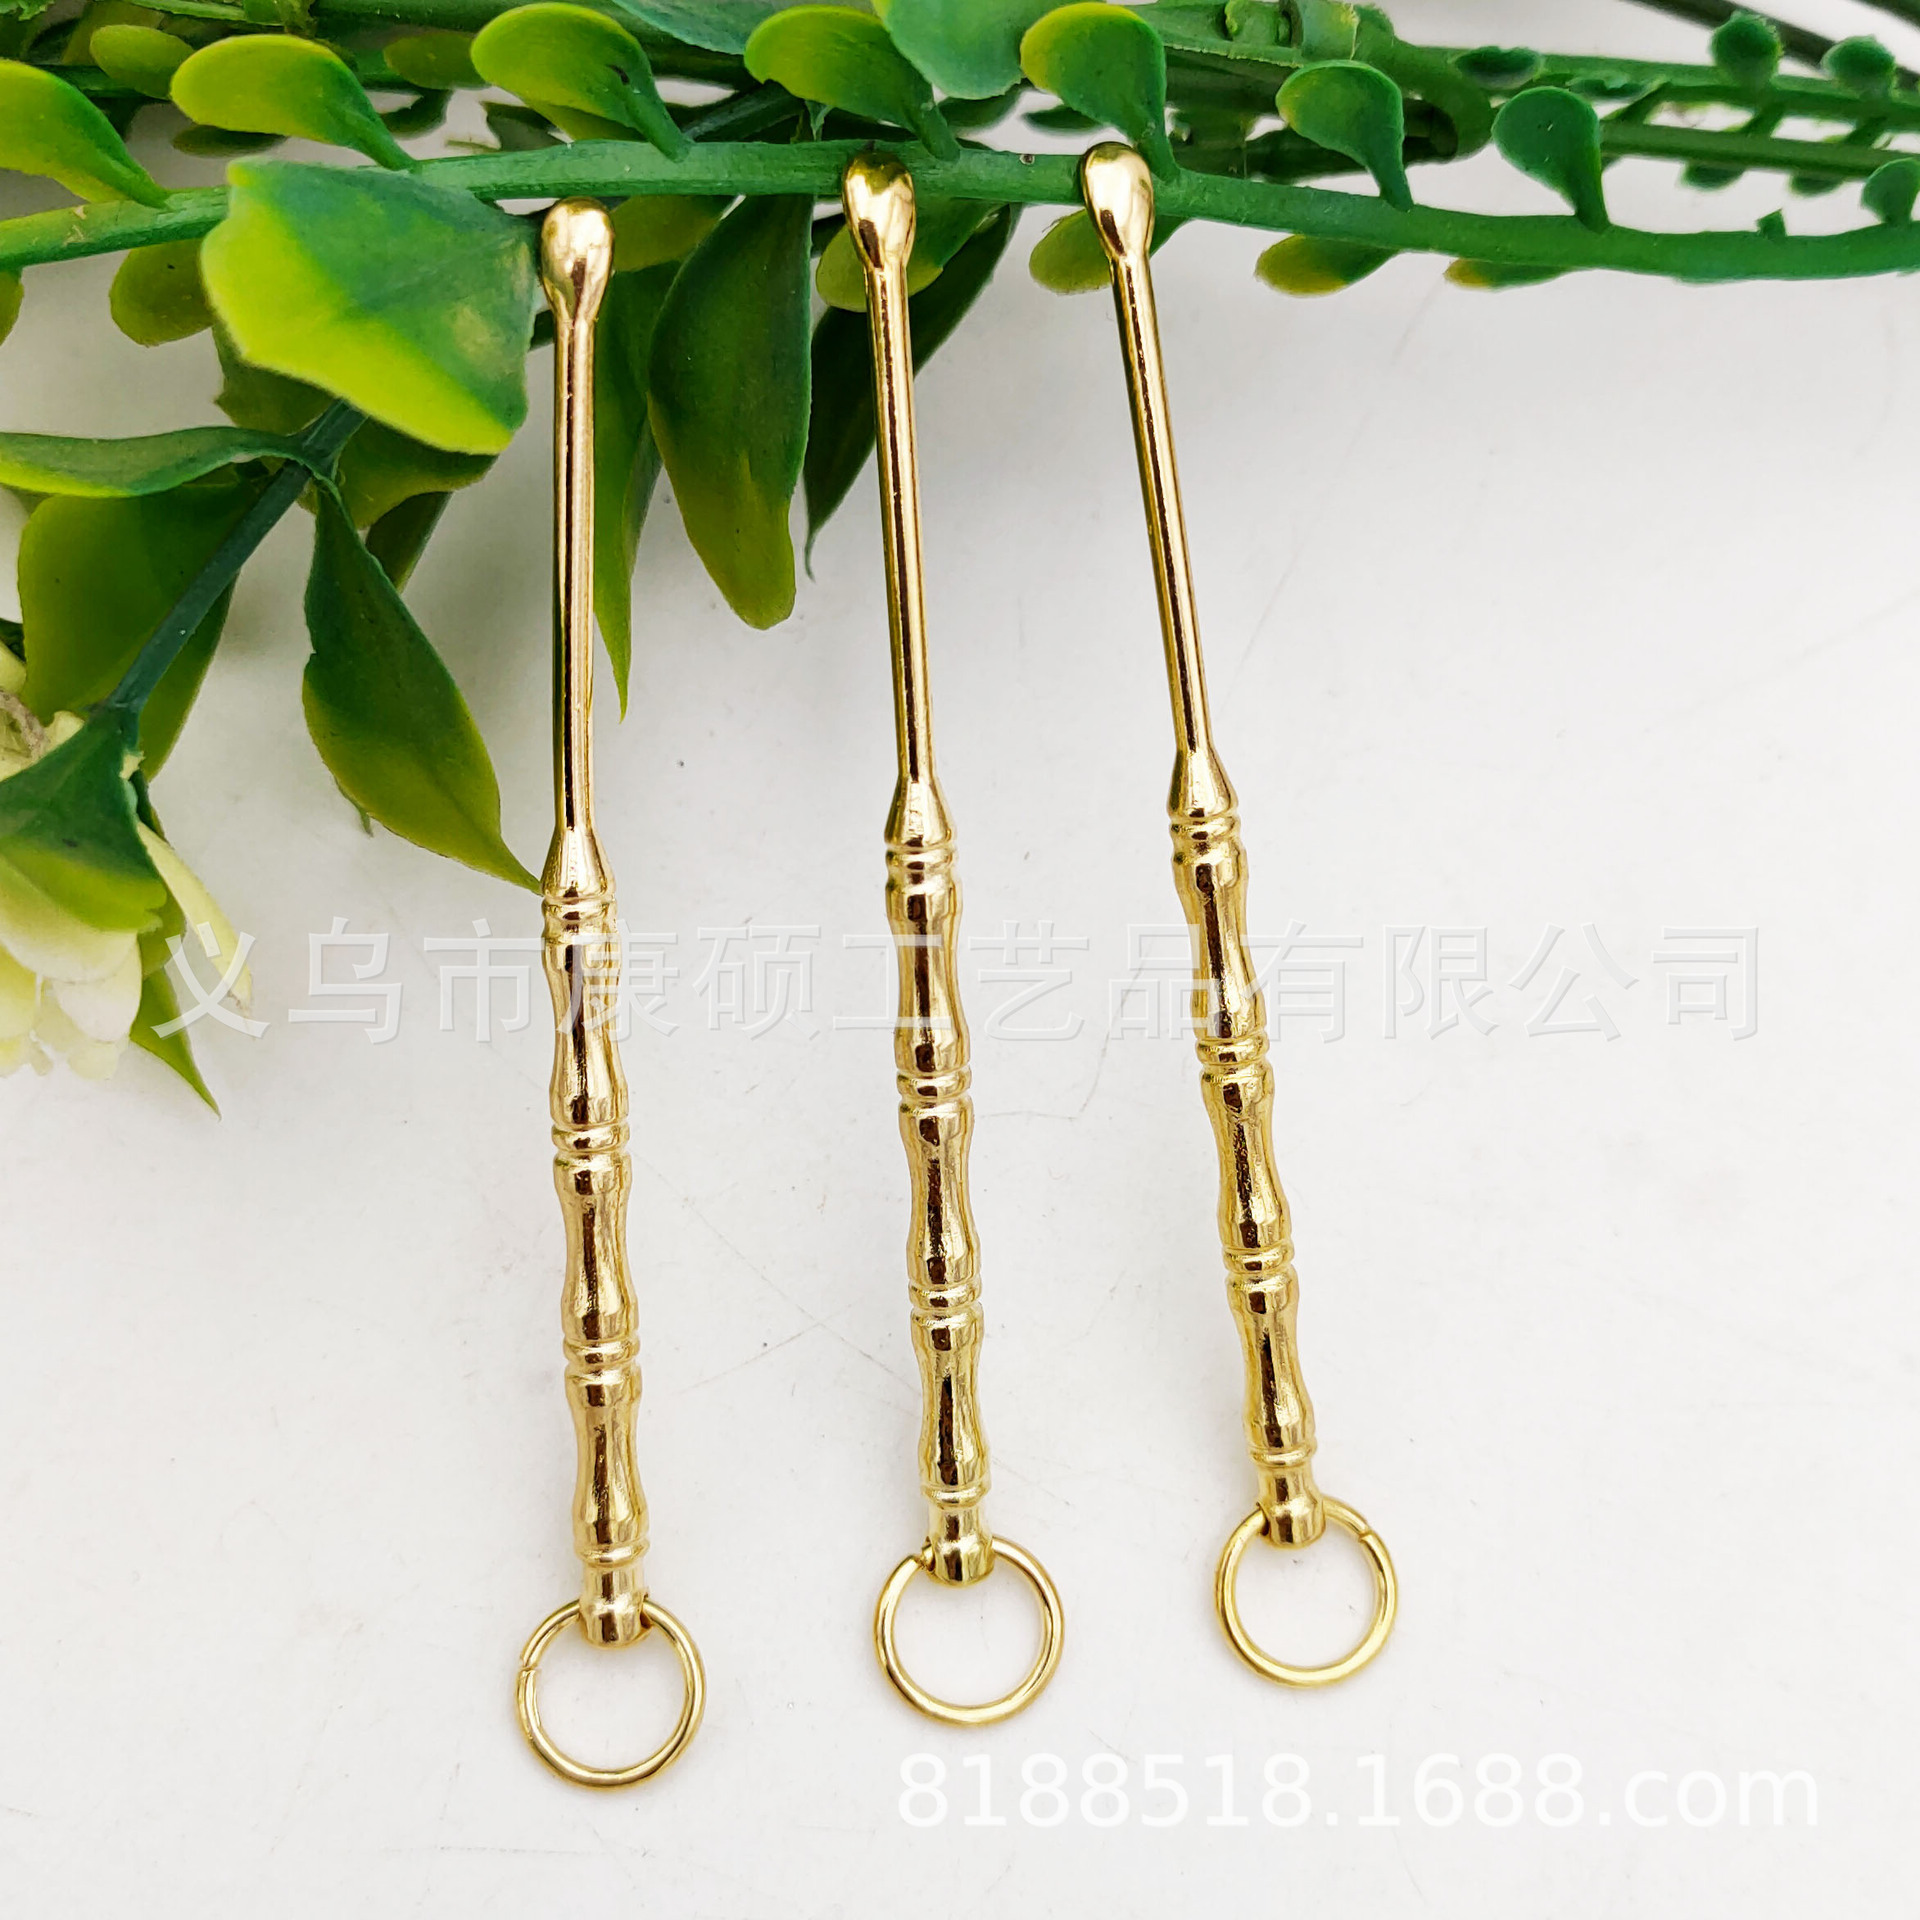 Manufacturer's Large Number of in Stock Wholesale Ear Pick Ear Pick Artifact Imitation Brass Bamboo Joint Ear-Picking Small Gift Live Broadcast with Goods